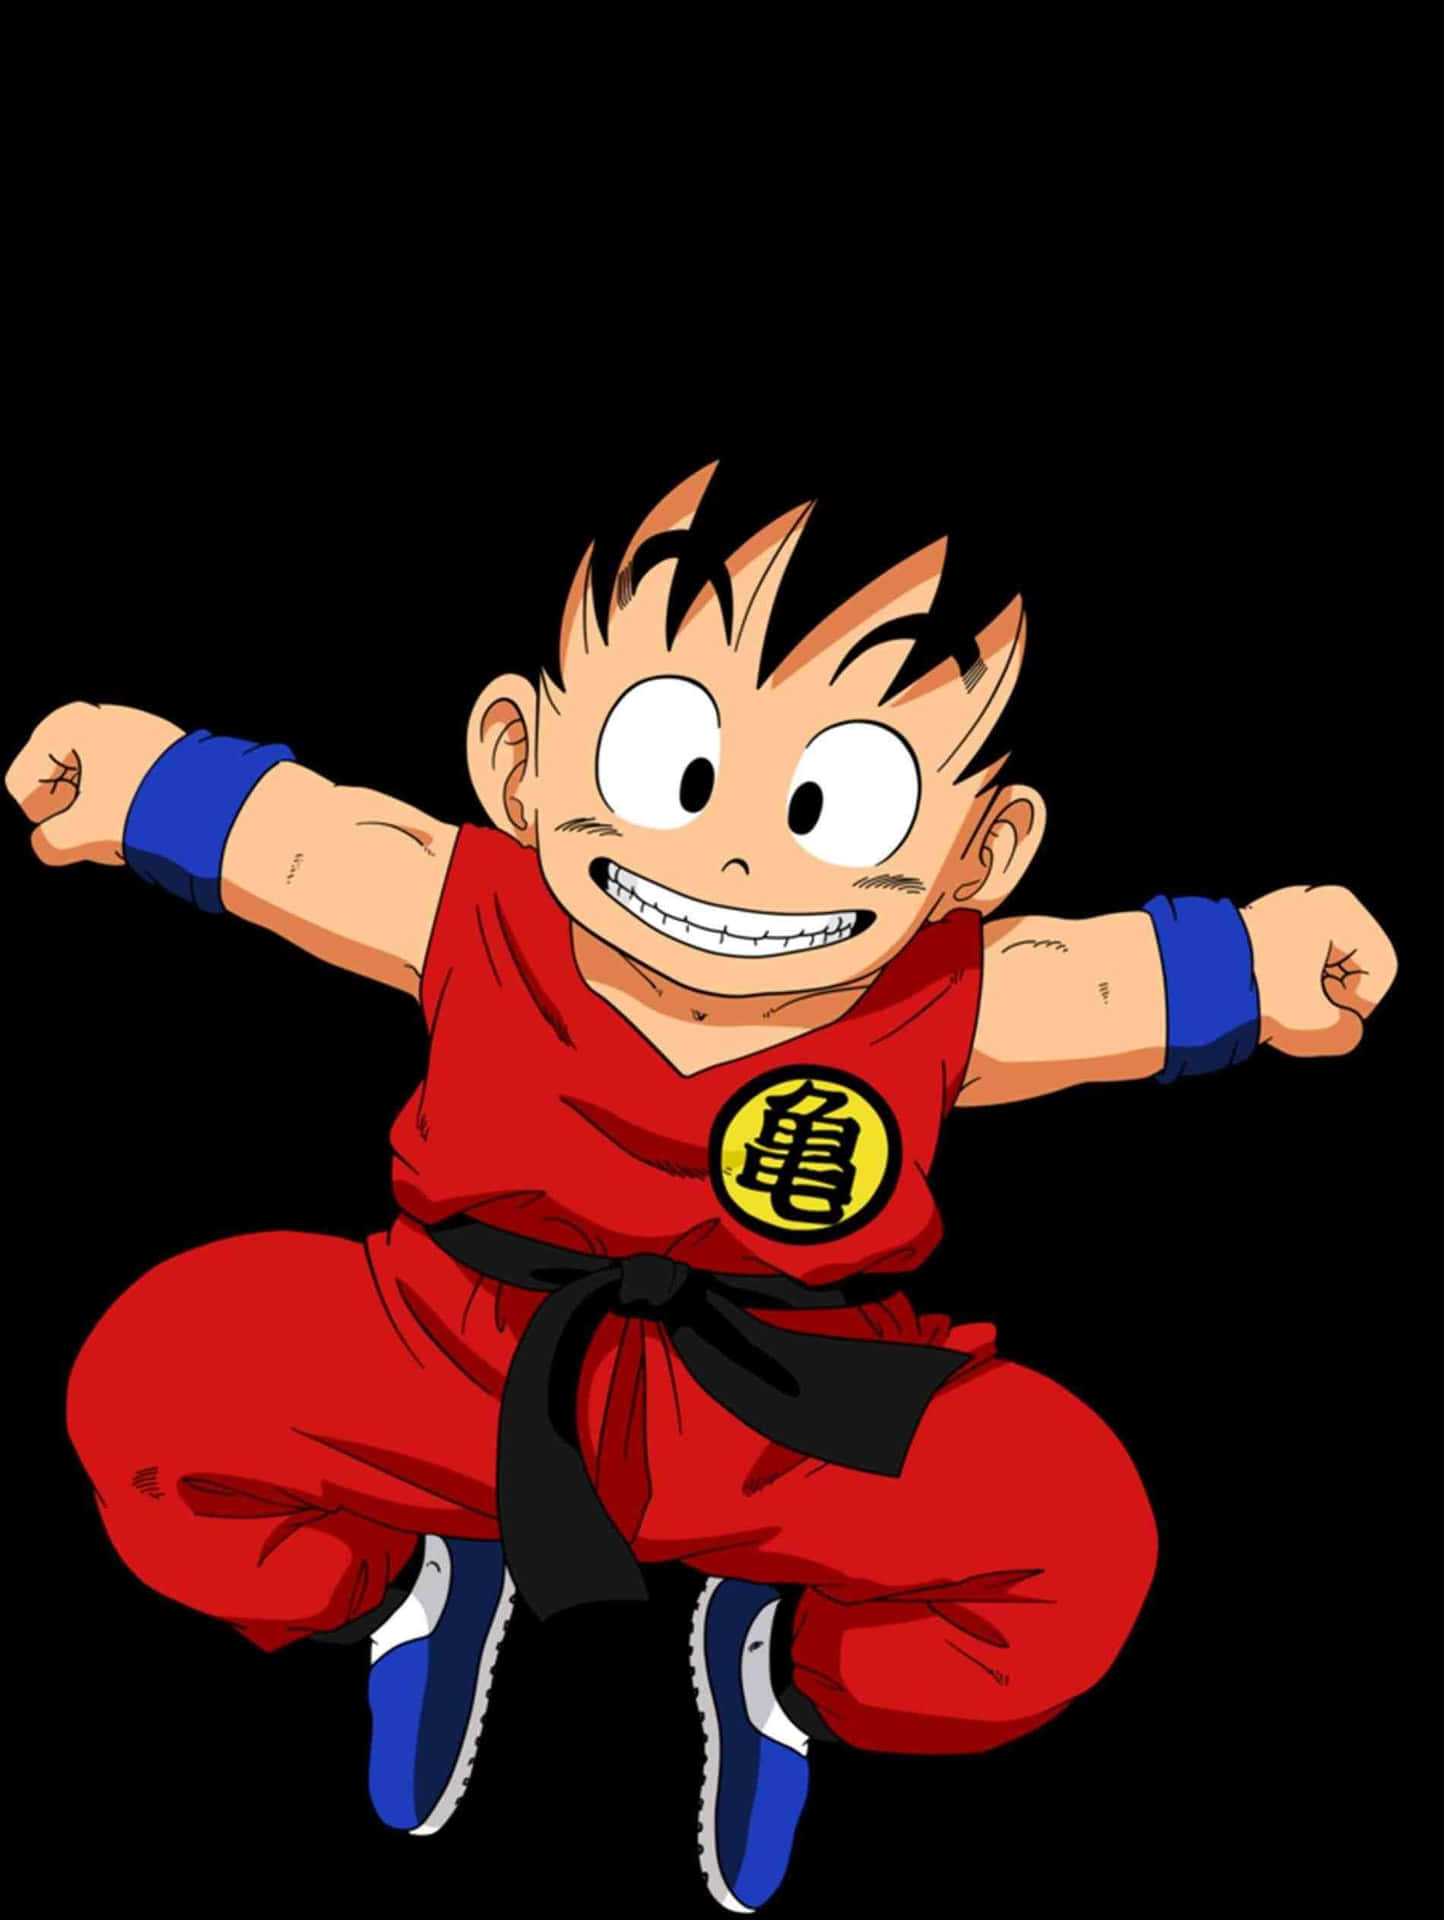 Make Your Day Brighter With Funny Goku Wallpaper